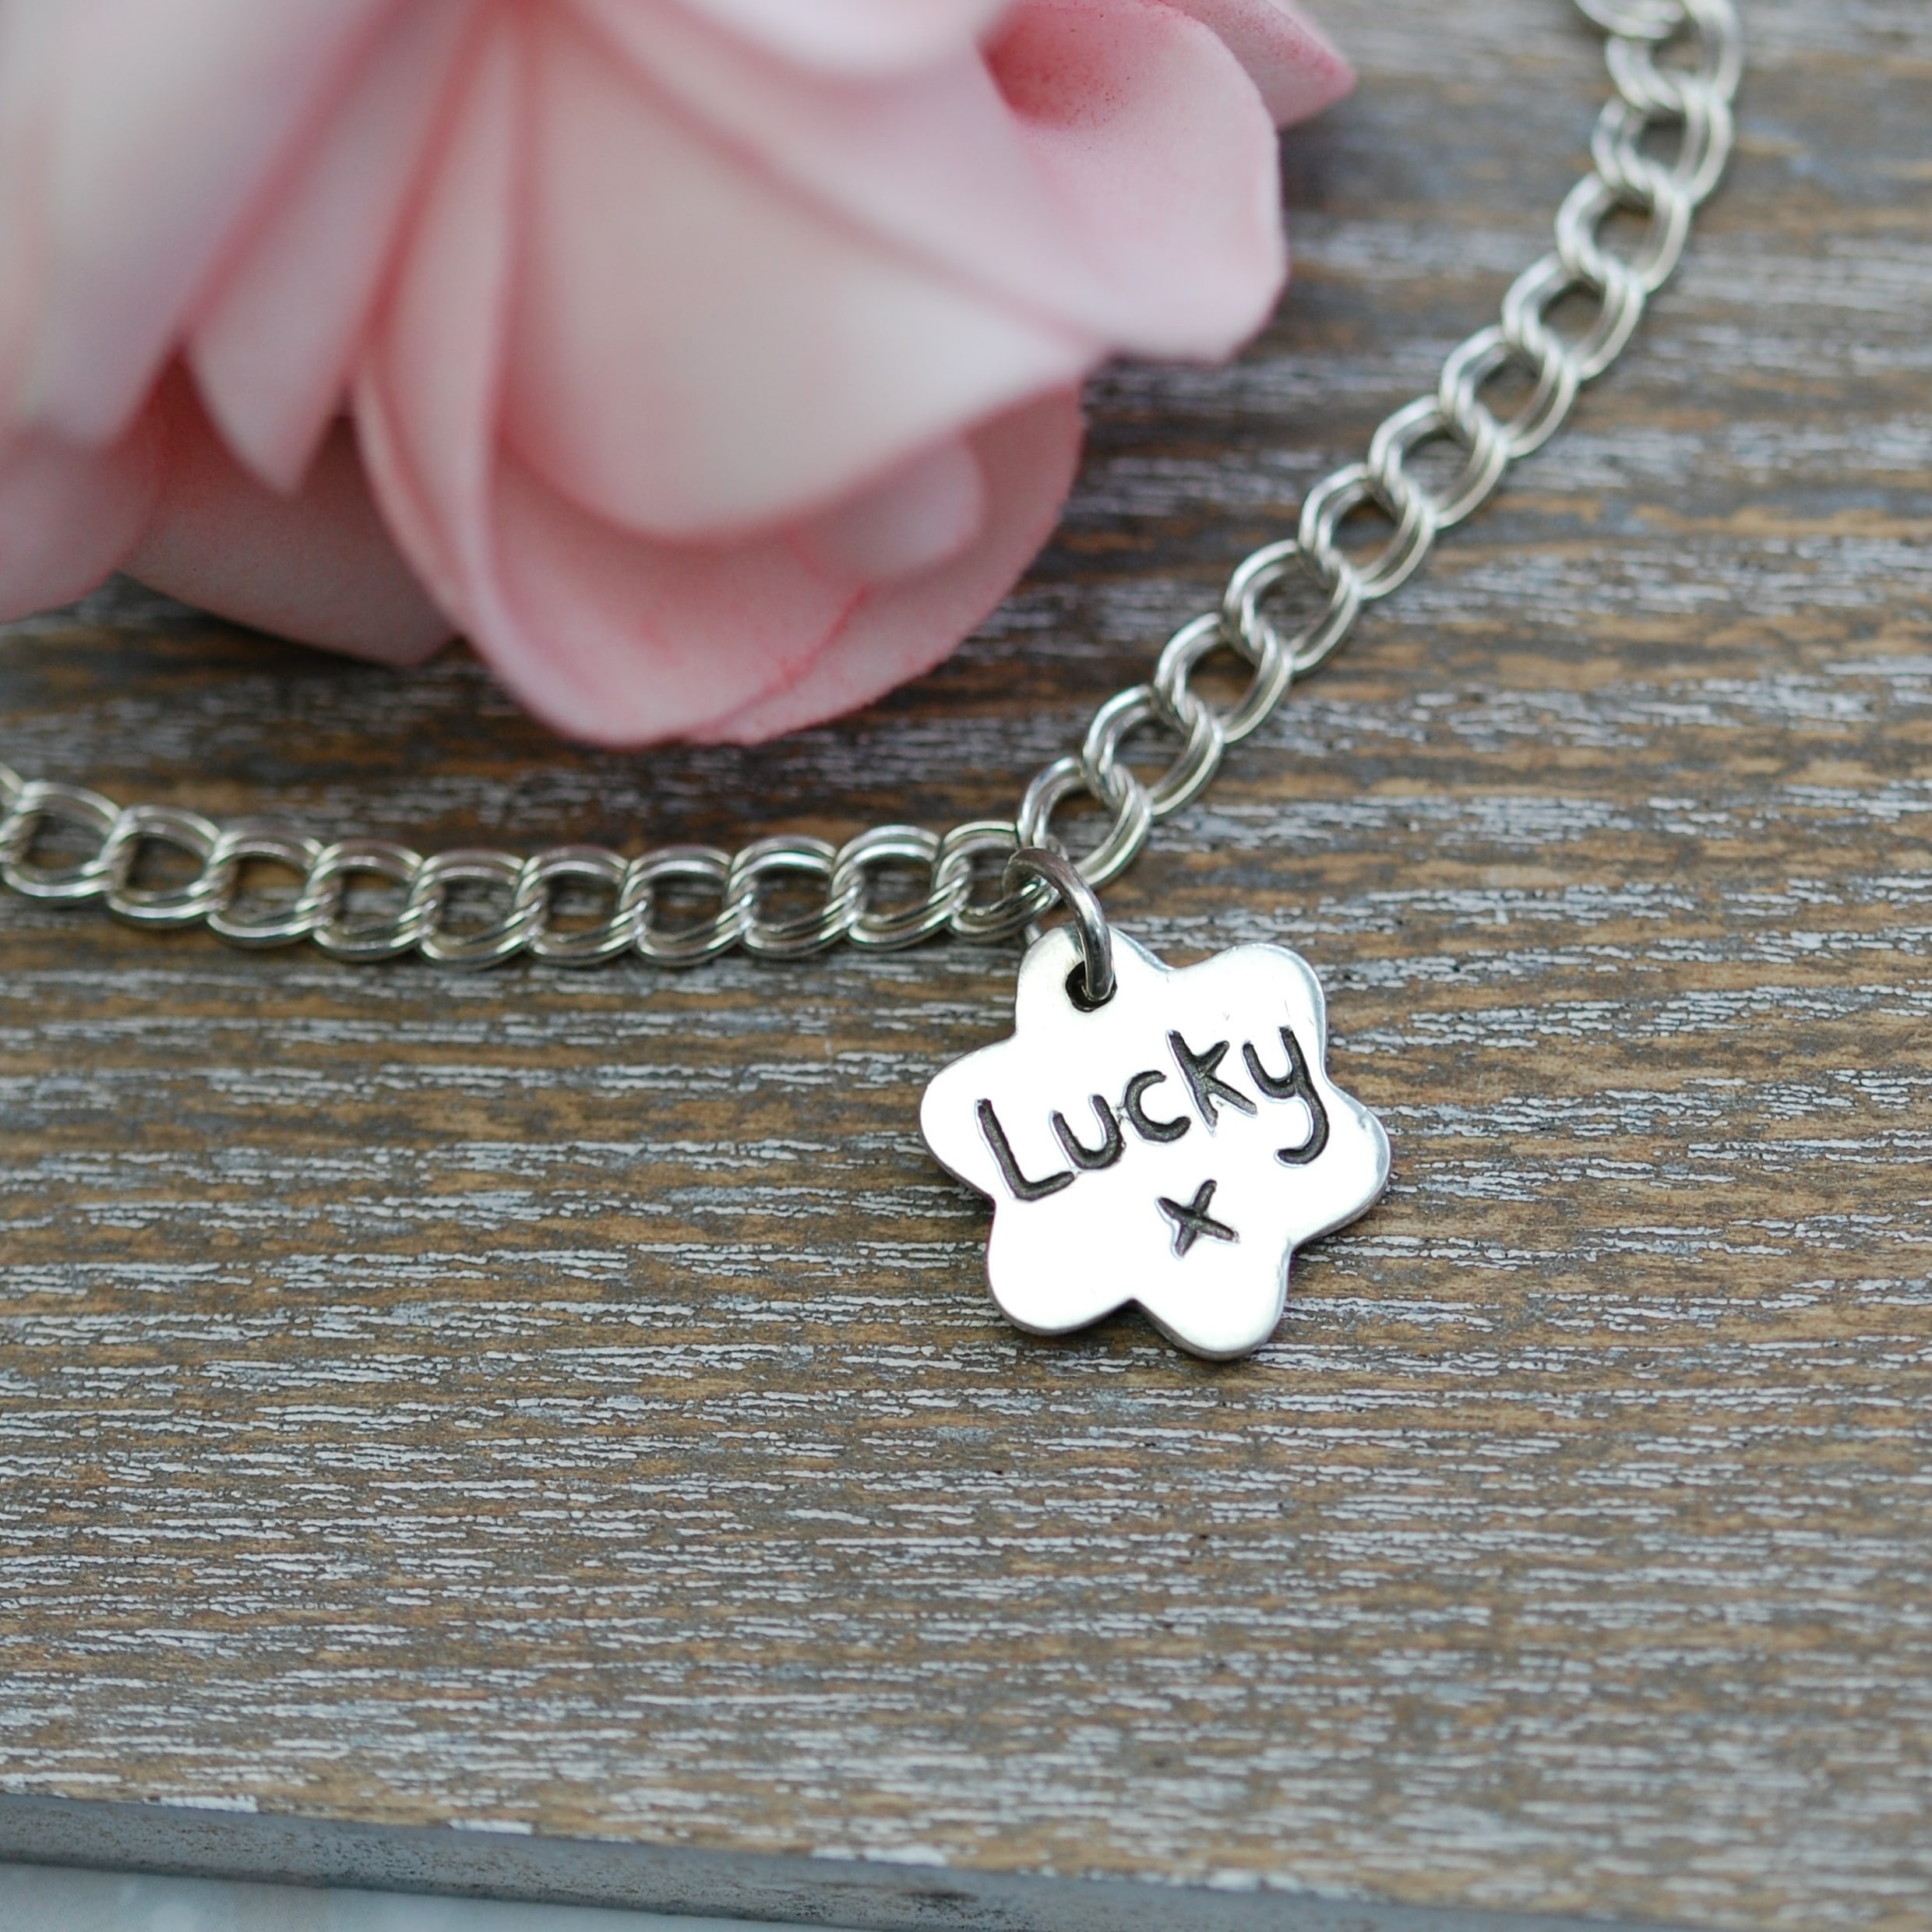 Inscription on the back of small paw print charm